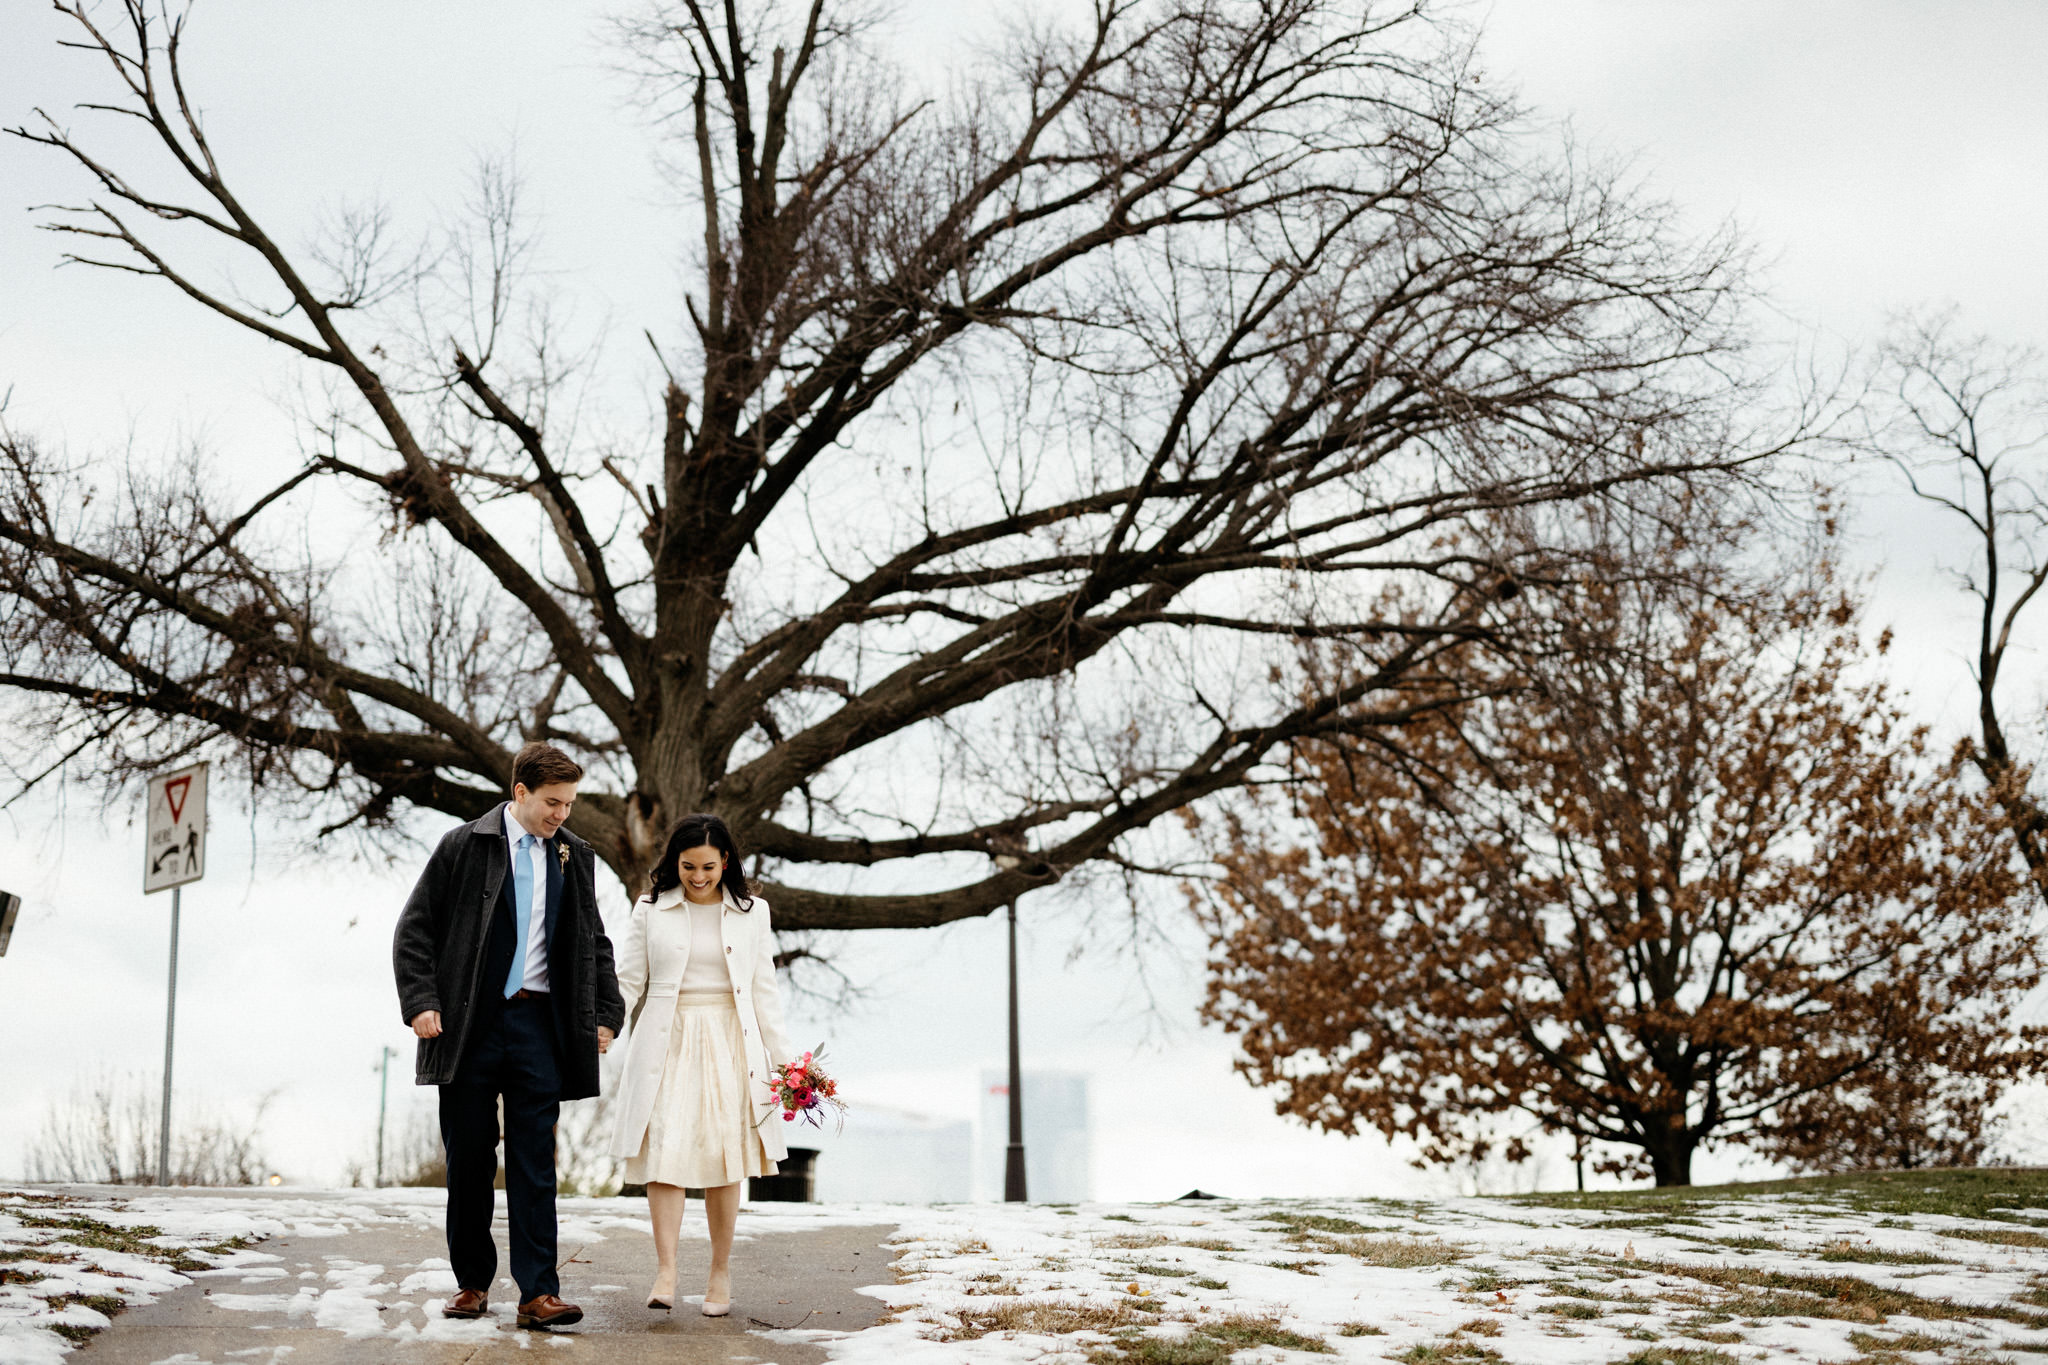 The newly-weds are happily walking in the snow. Winter wedding venues image by Jenny Fu Studio